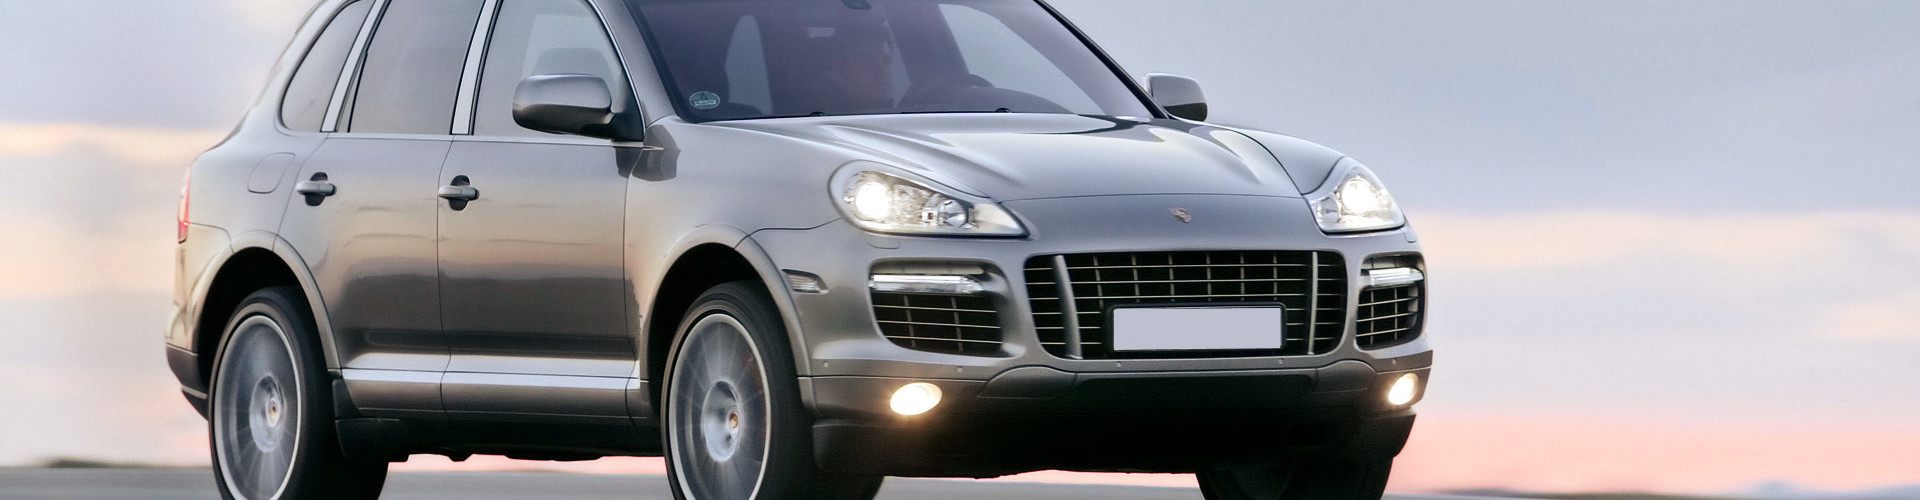 Porsche Cayenne Used Car Buers Guide